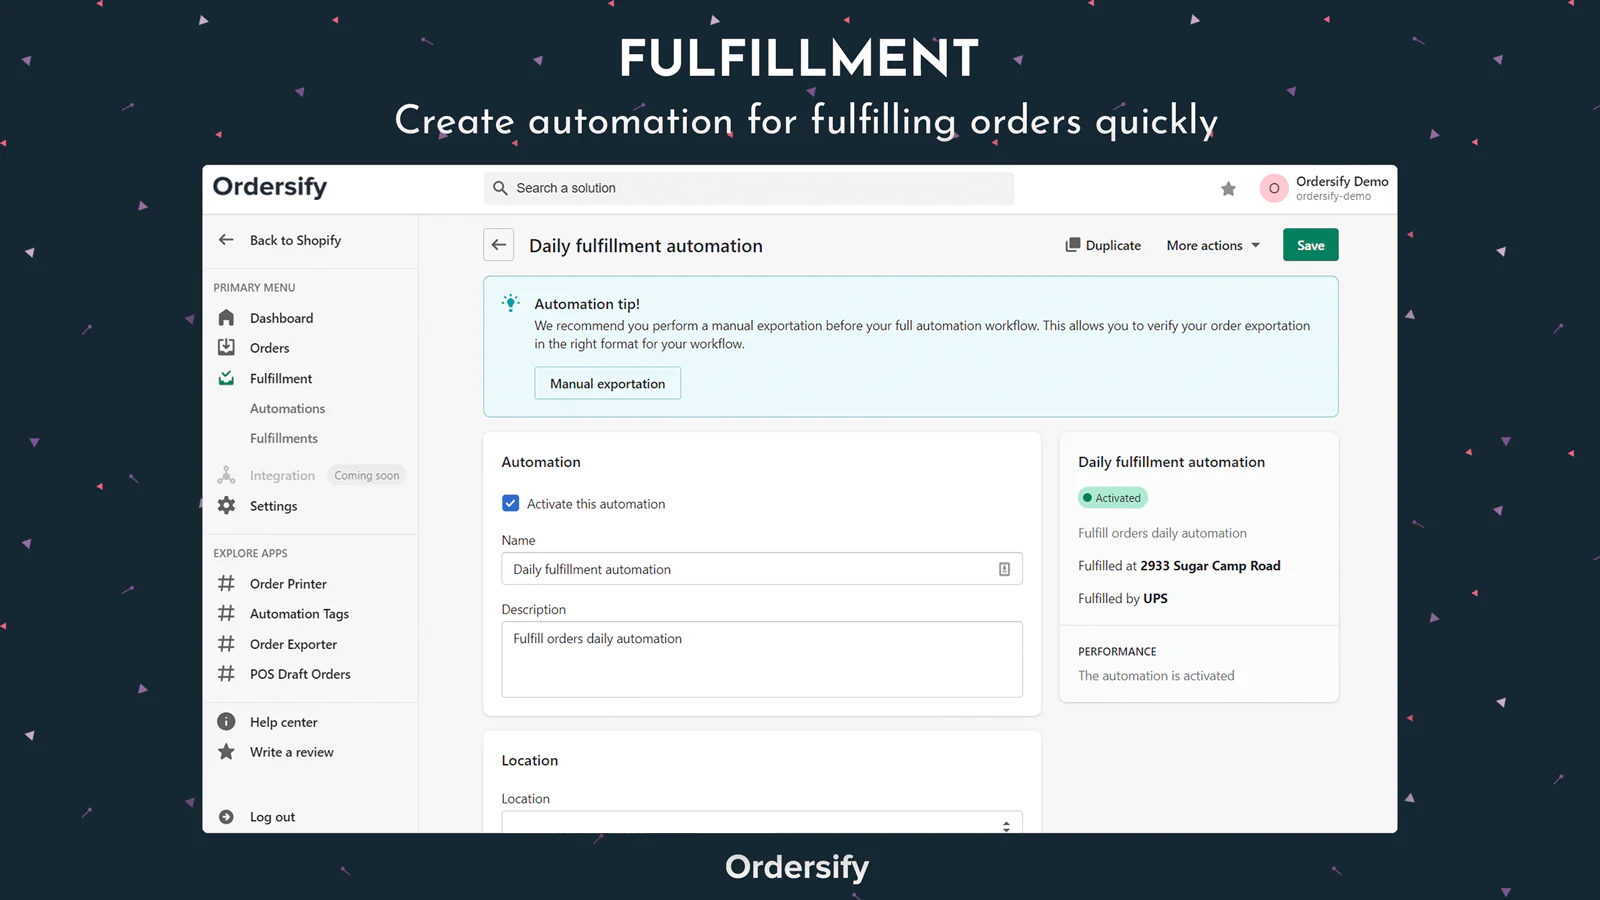 Fulfillment - Create automation for fulfilling orders